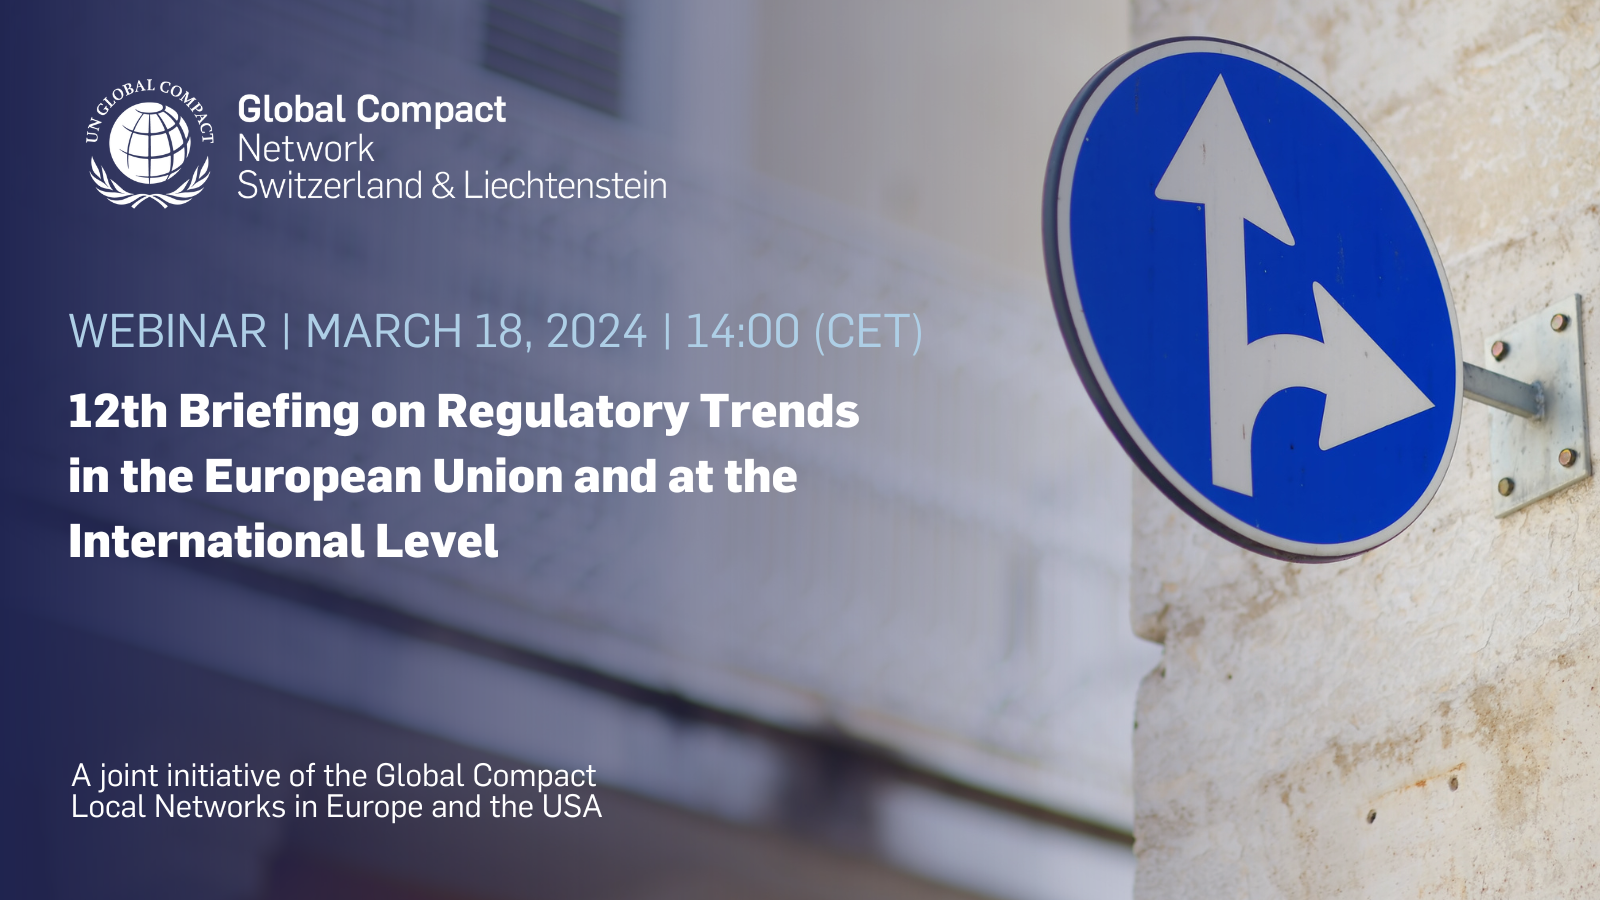 Join to be briefed on recent regulatory developments in the EU and internationally and learn what actions that are expected from companies.